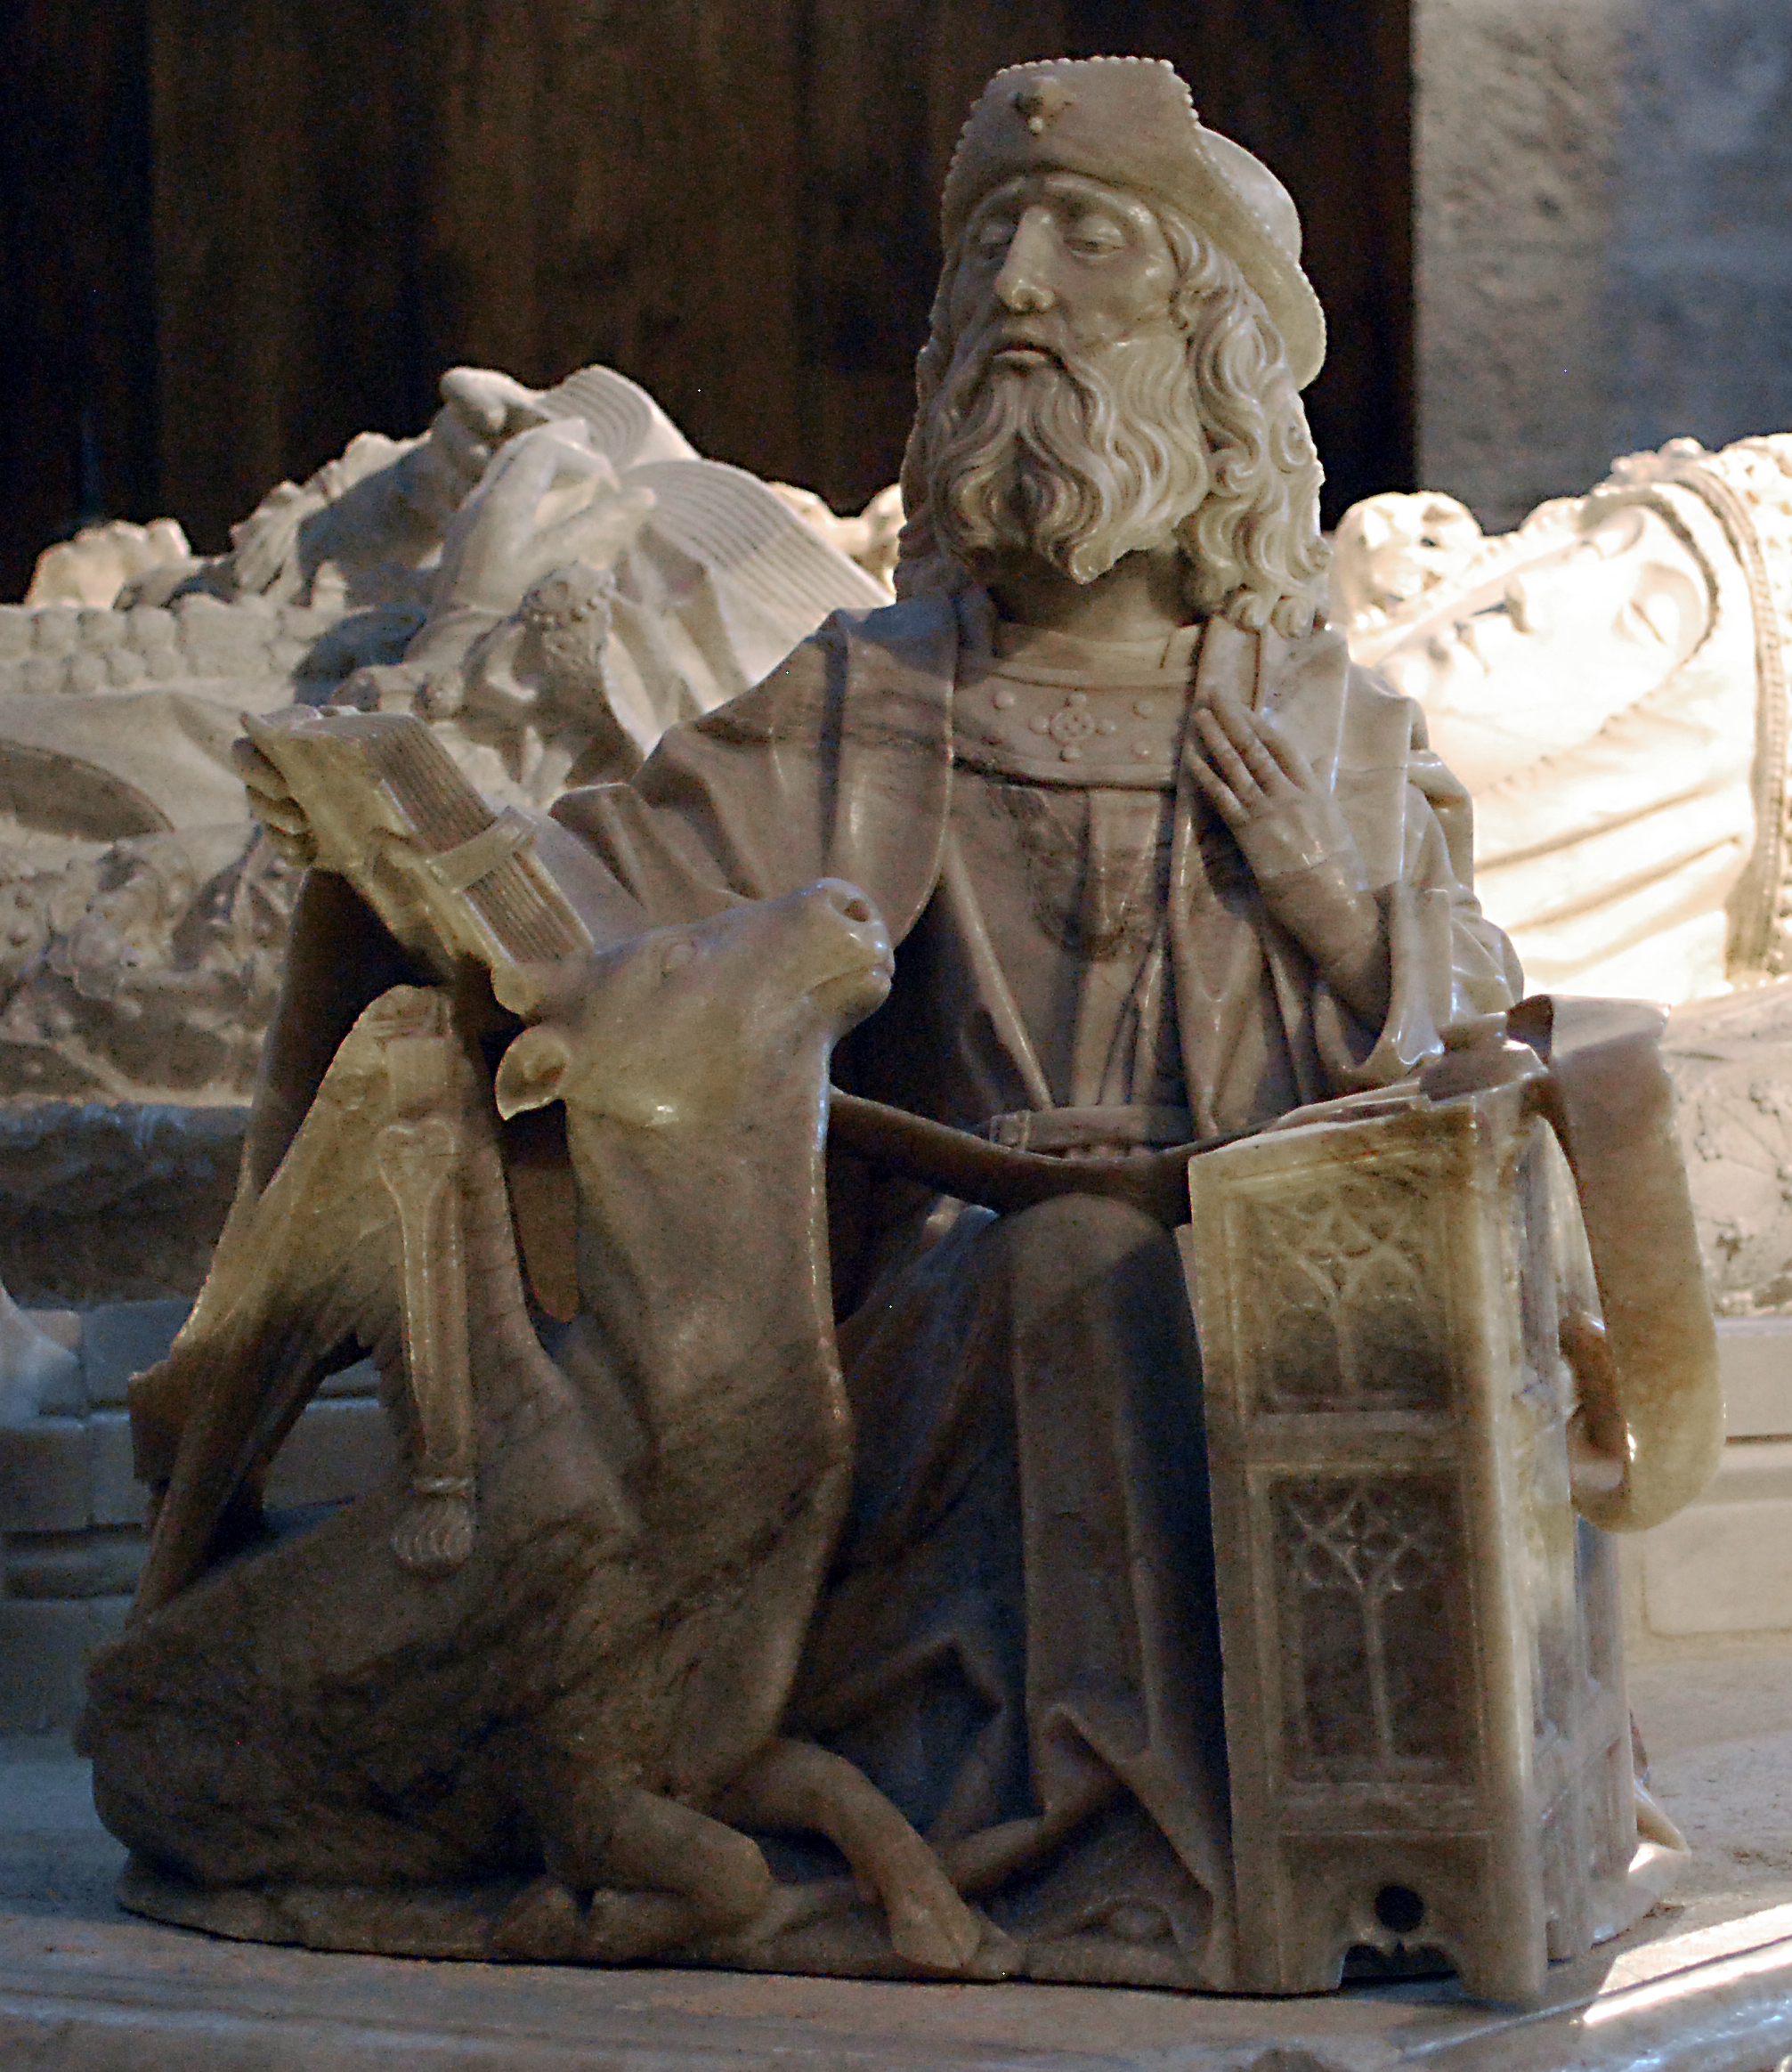 Gil de Siloe, The Tomb of Juan II of Castile and Isabel of Portugal, detail of St. Luke, 1489-93, alabaster (photo: Concierge.2C, CC BY-SA 3.0)